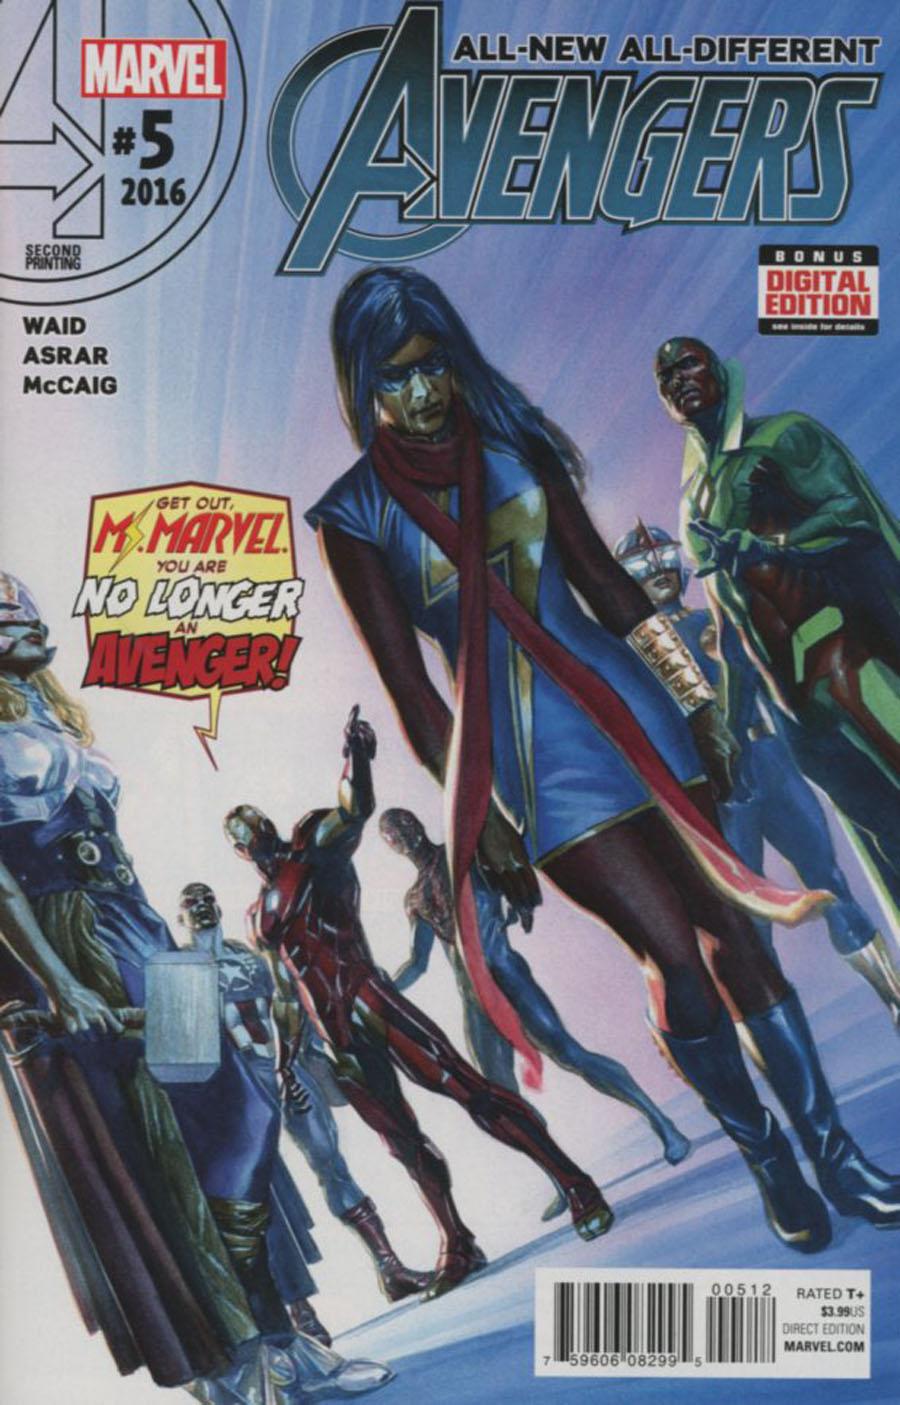 All-New All-Different Avengers #5 Cover C 2nd Ptg Alex Ross Variant Cover